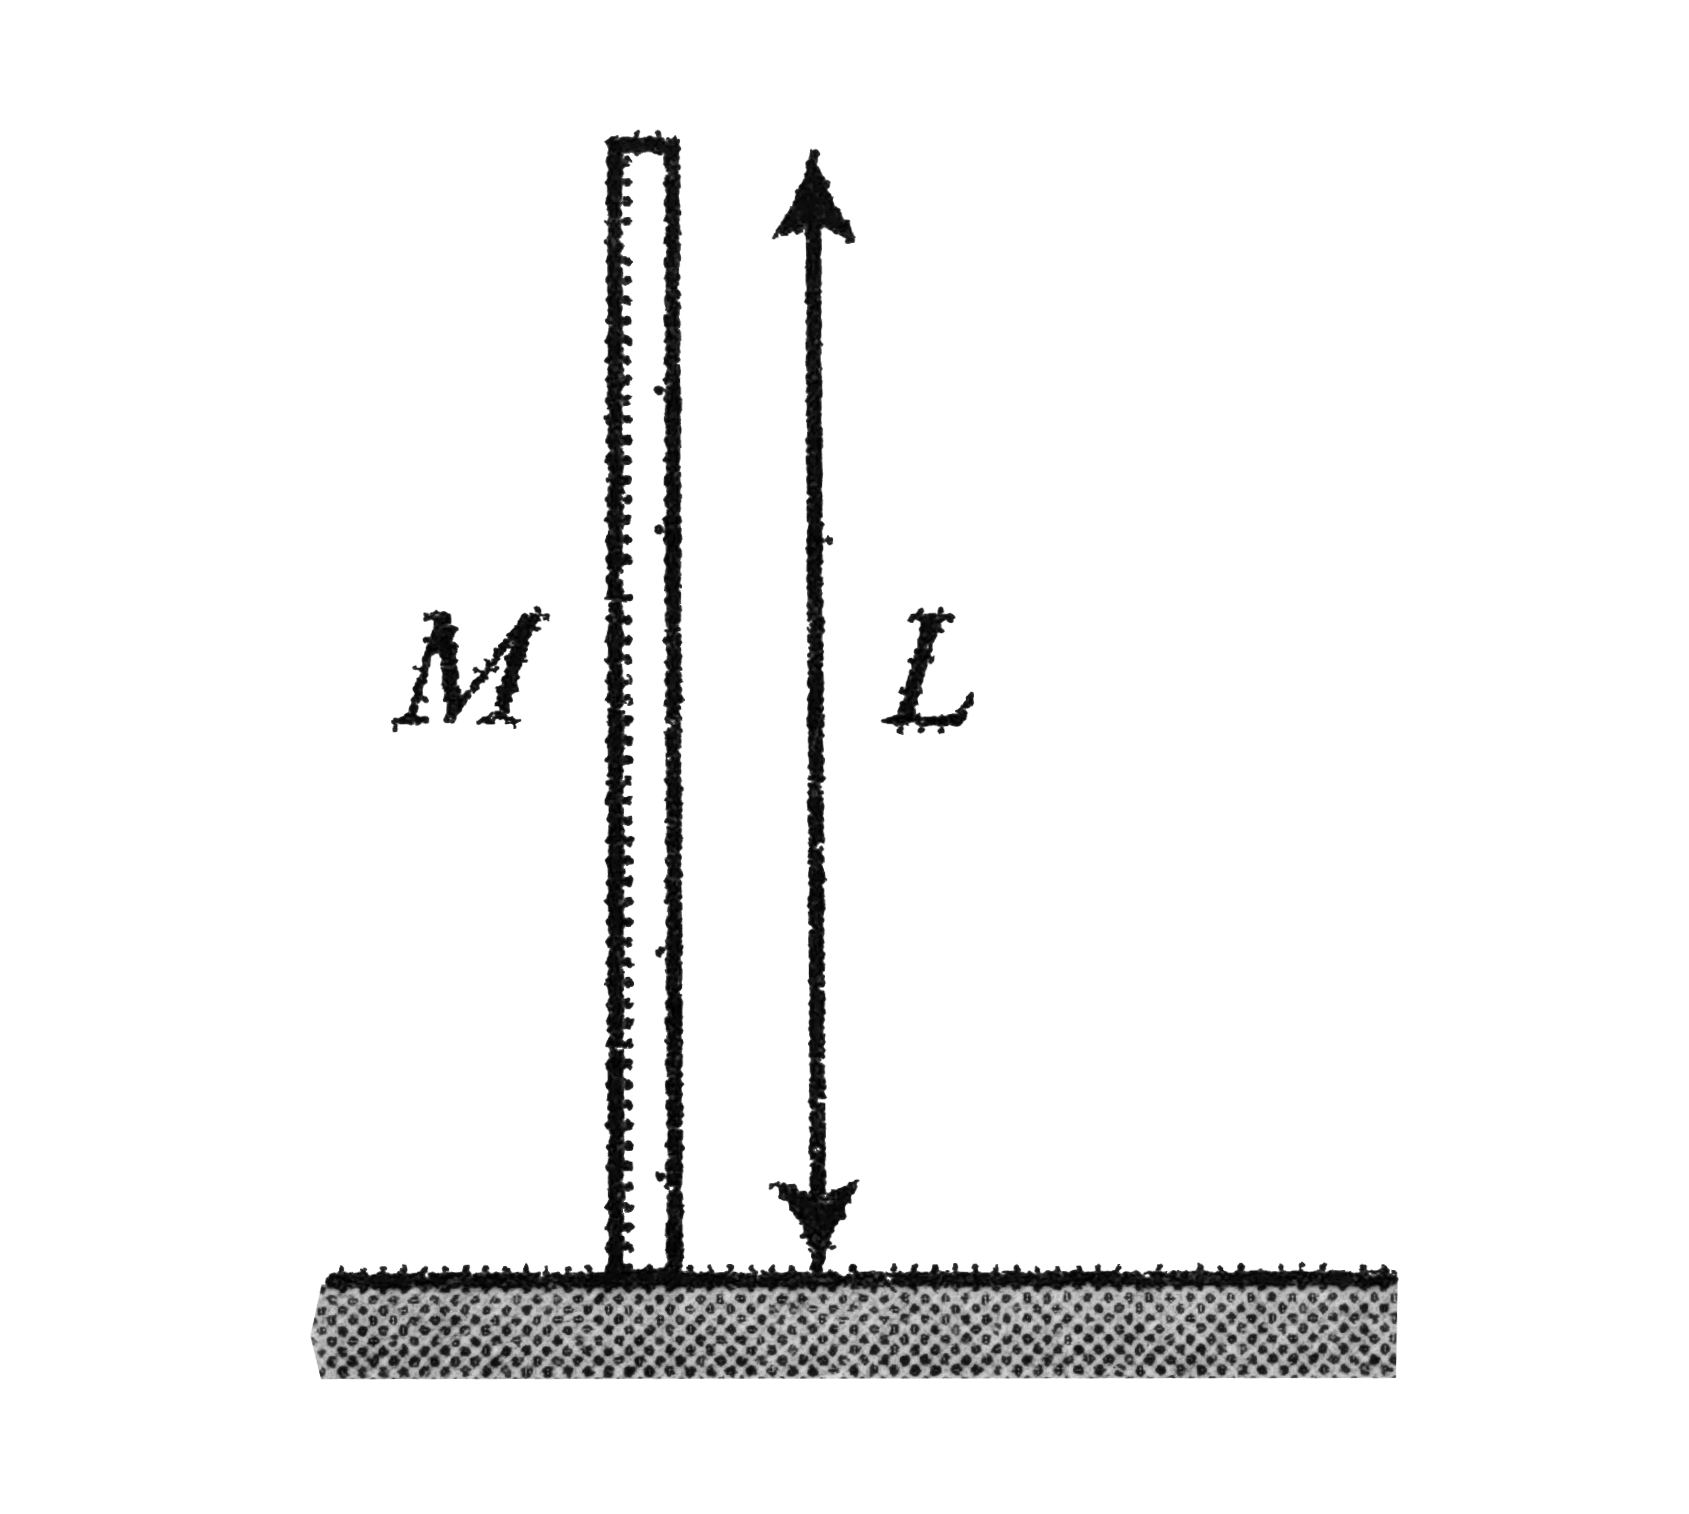 A uniform rod of mass M and length L is held vertically upright on a horizontal surface as shown in figure. Assuming zero potential energy at the base of the rod, determine the potential energy of the rod.